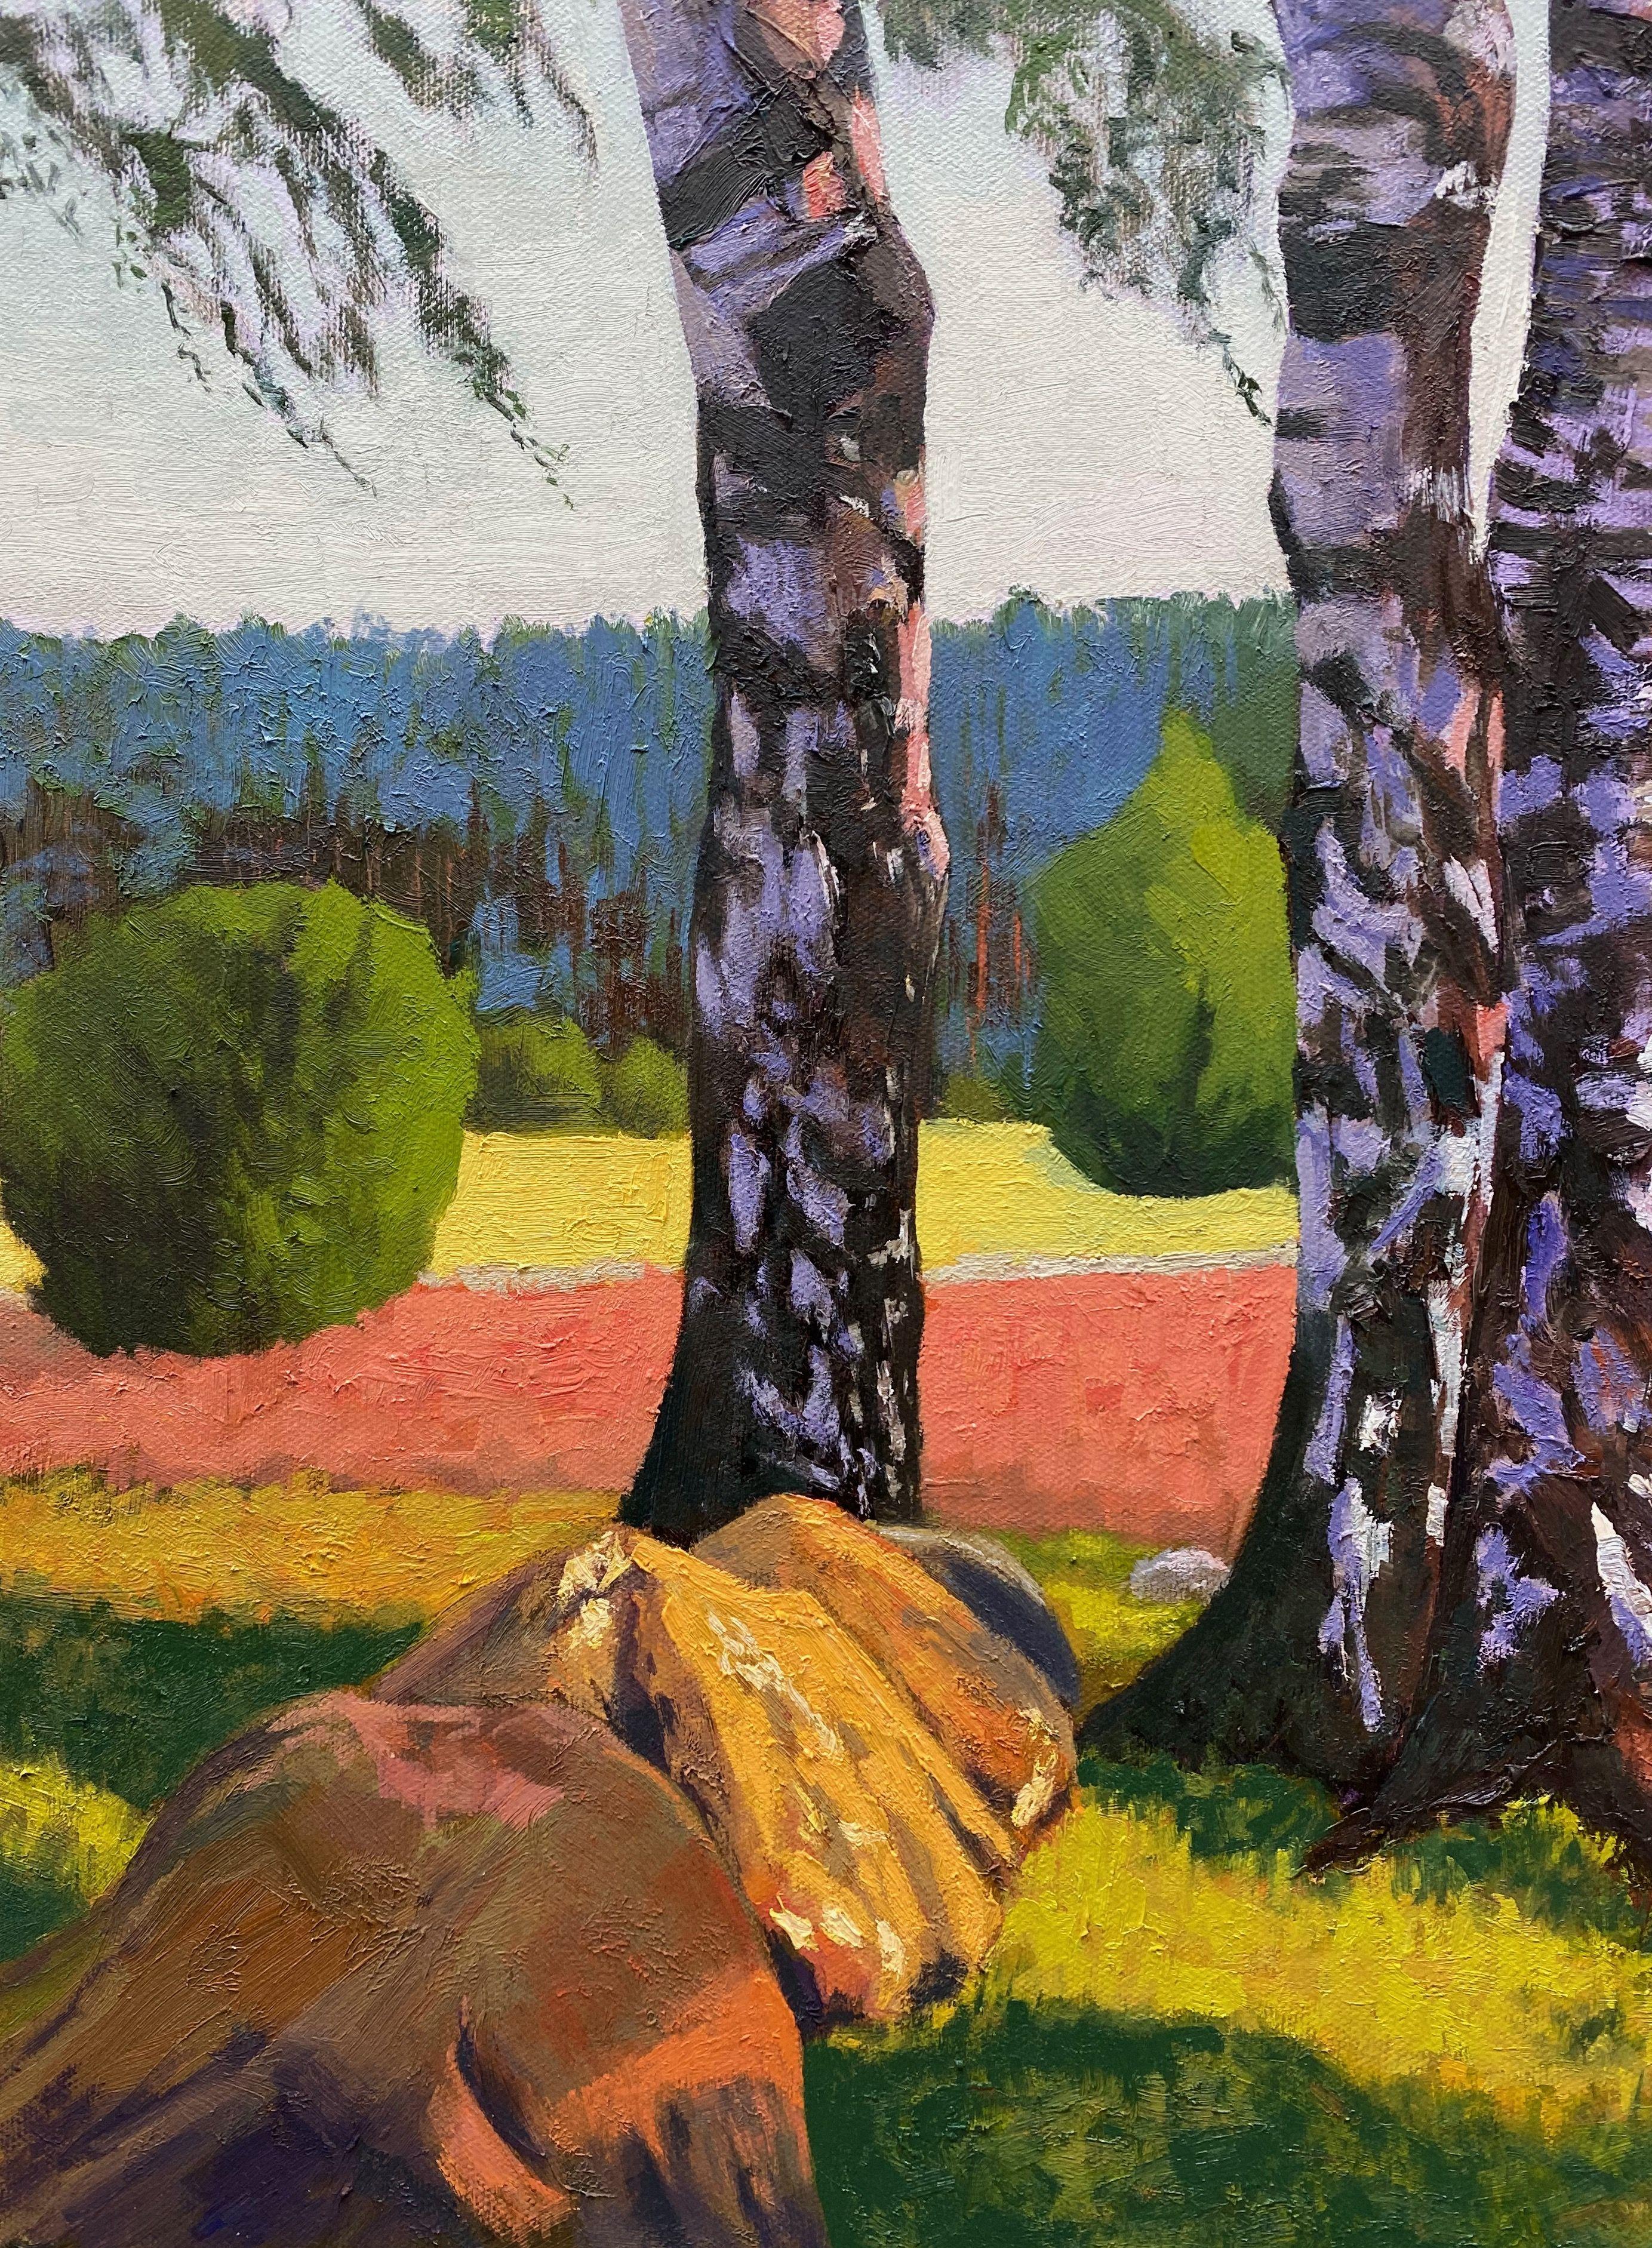 I became the inspiration for this painting from a Photo sent to me from Mrs. Woydeck, she lives near the beautiful Ellendorfer Heath, Germany.   My aim was to capture the warmth of the sunlit boulders, bathing in the sun.   :: Painting ::